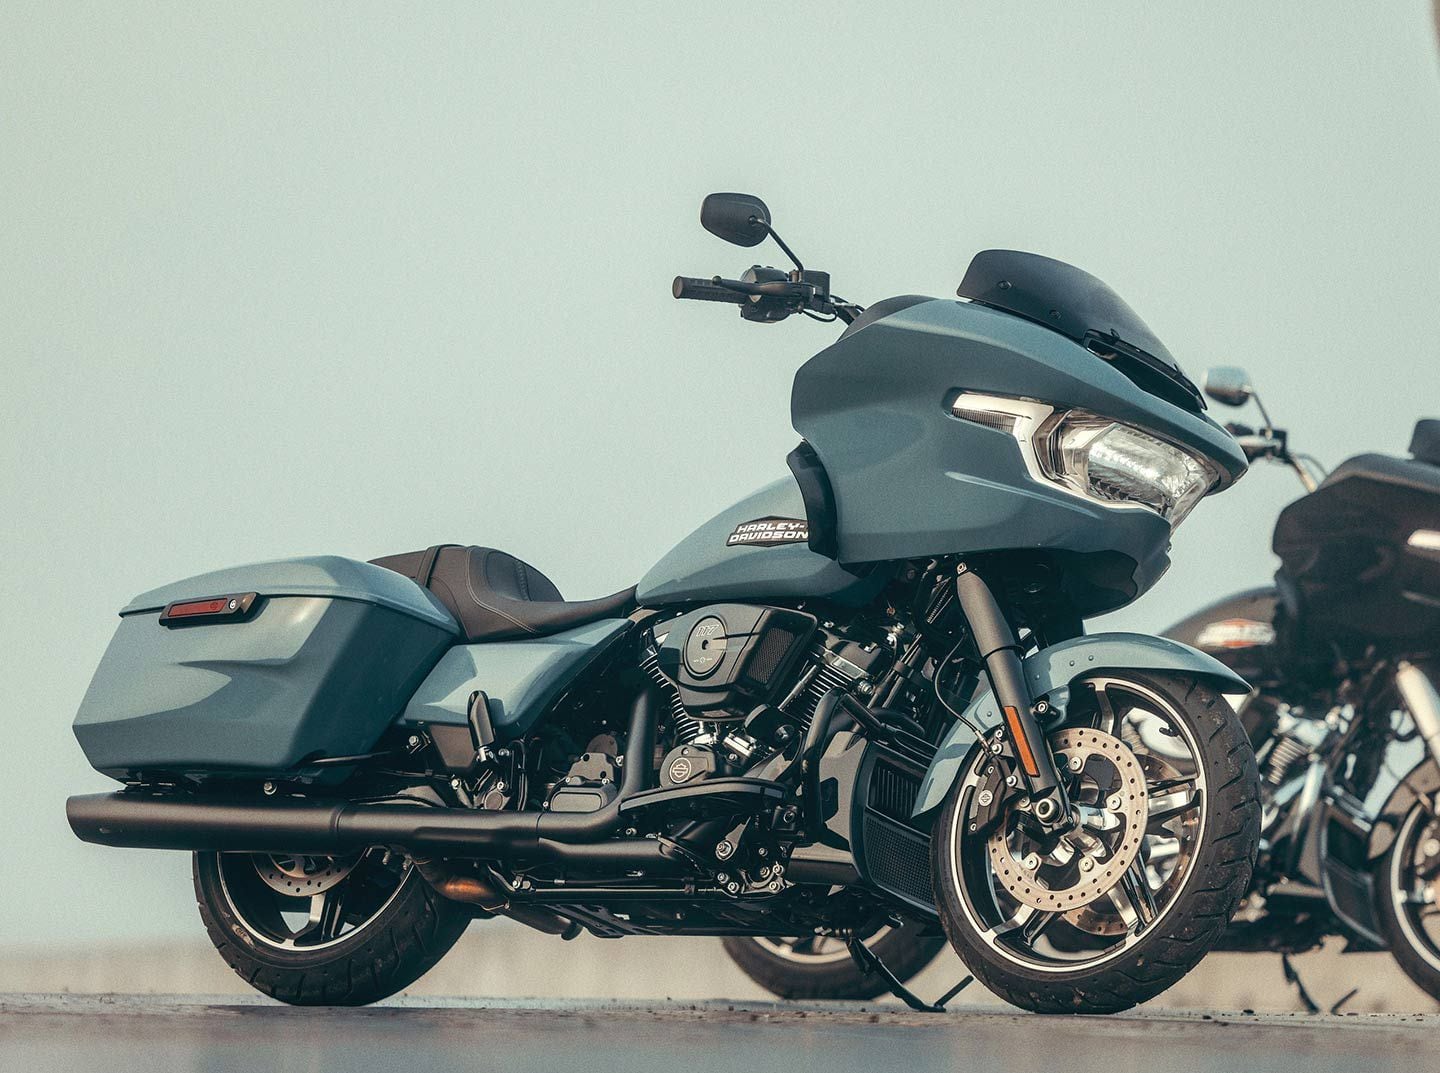 Redesigned fairing on the 2024 Road Glide also features a new windshield with air management and revised LED lighting arrangement.